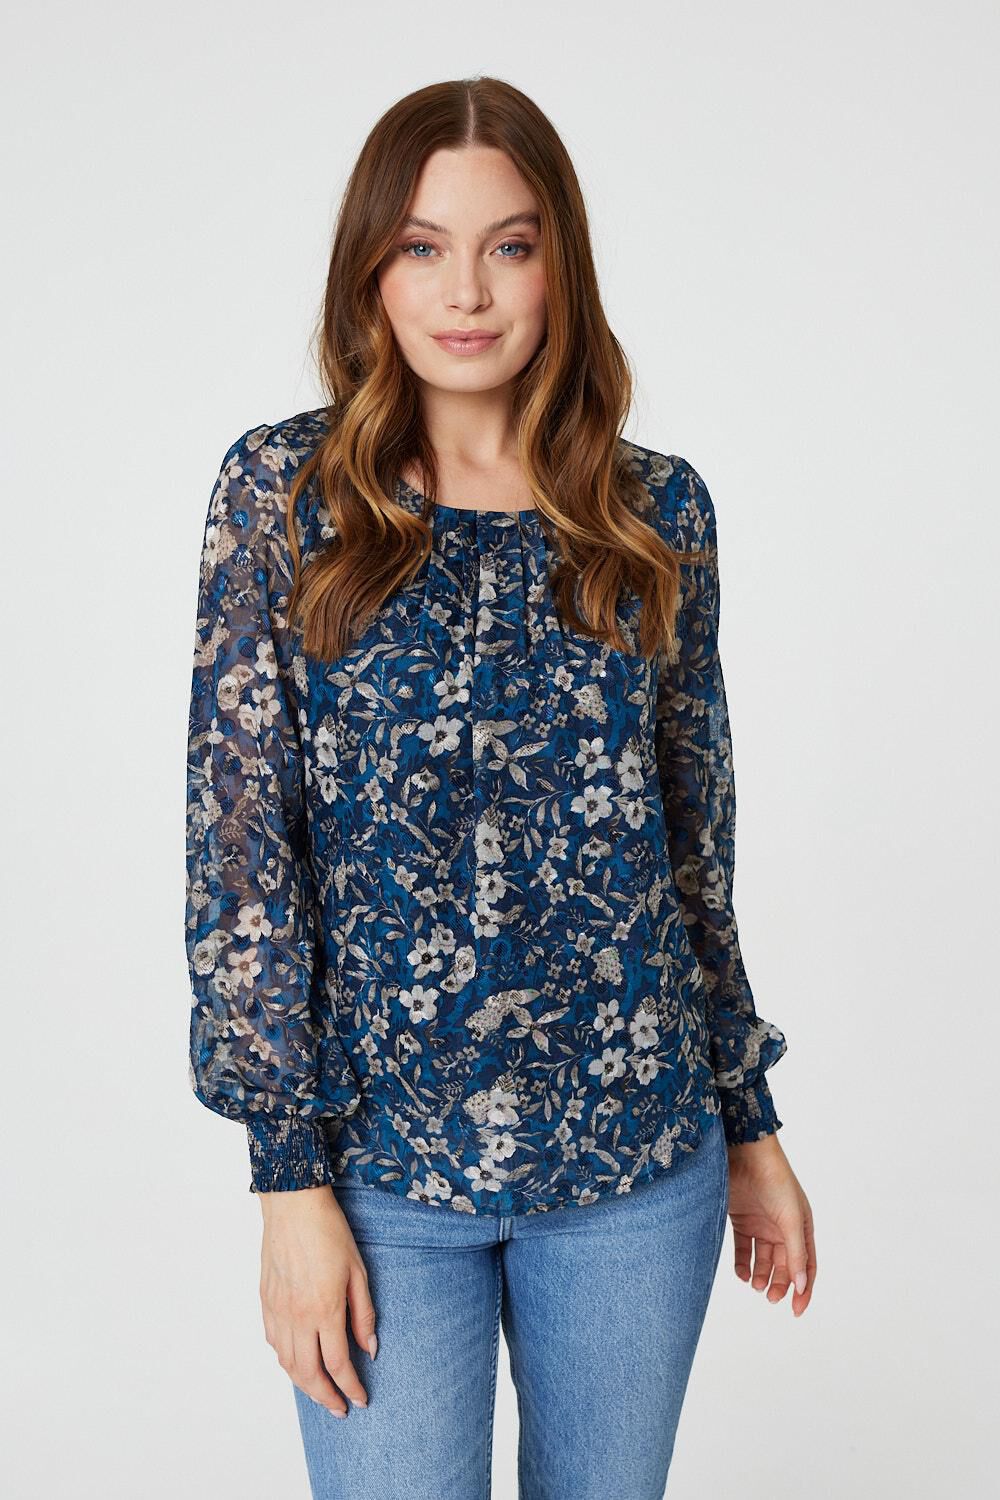 Izabel London Women’s Blue and Grey Floral Print Long Sleeved Blouse Top, Size: 12